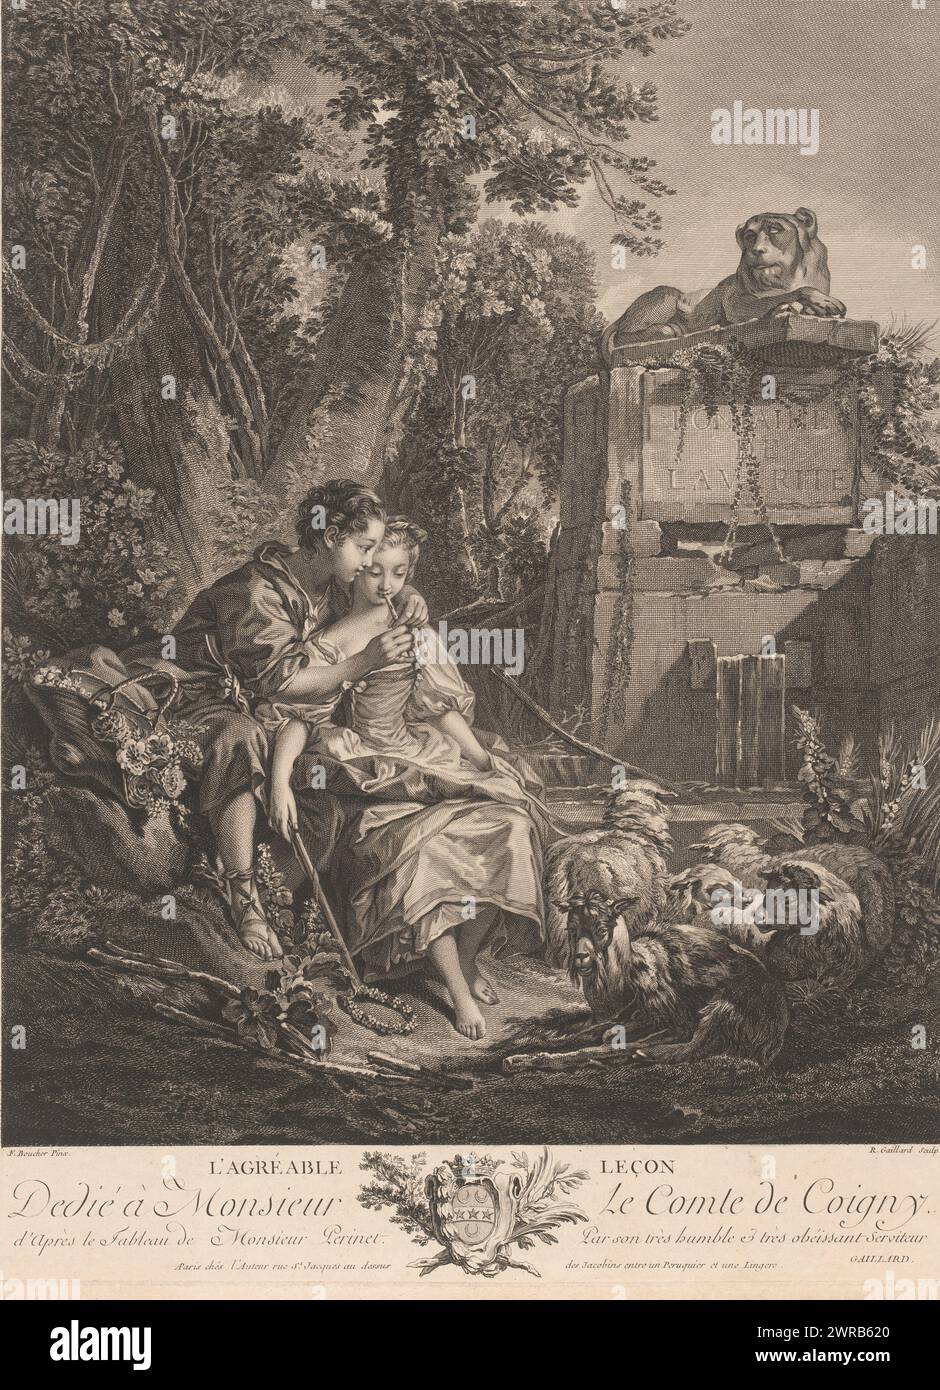 Shepherd teaches shepherdess to play the flute, L'Agréable Leçon (title on object), print maker: René Gaillard, after painting by: François Boucher, publisher: René Gaillard, print maker: Paris, publisher: Paris, Paris, France, in or before 1758, paper, engraving, etching, height 499 mm × width 380 mm, print Stock Photo